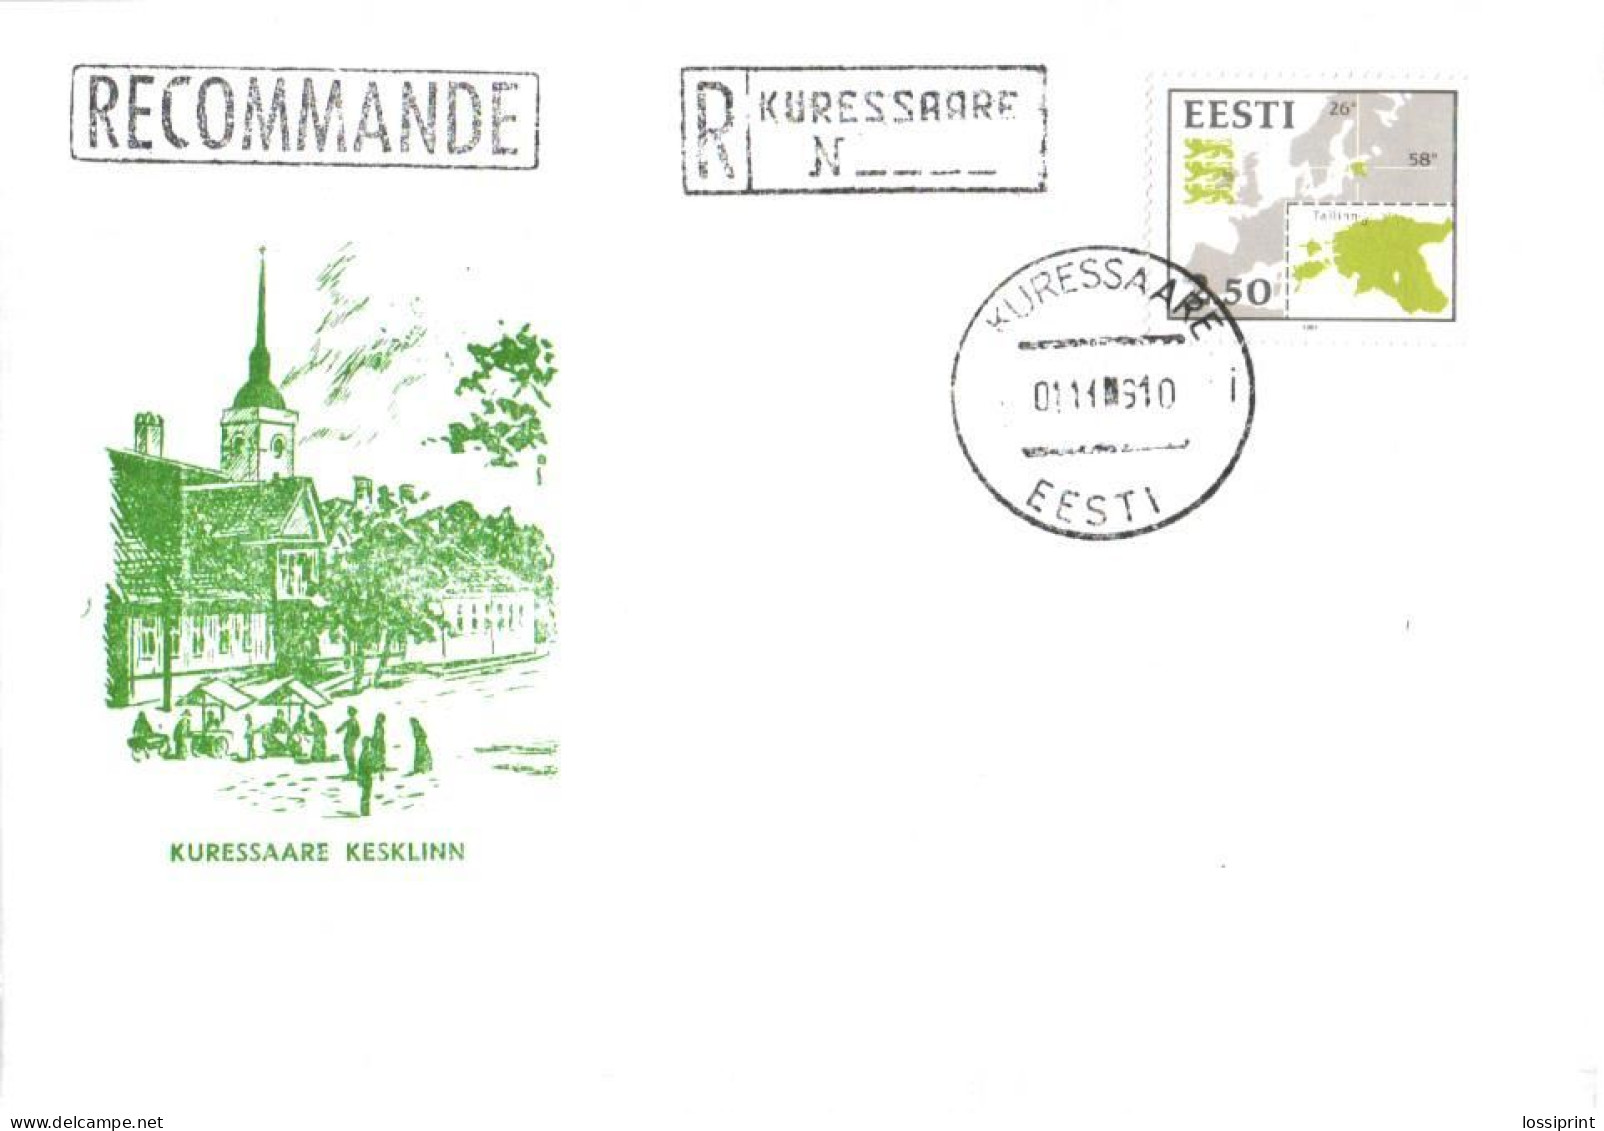 Estonia:FDC, Land Map Stamp With Kuressaare Registered Cancellation And Recommande Stamp, 1991 - Estonia